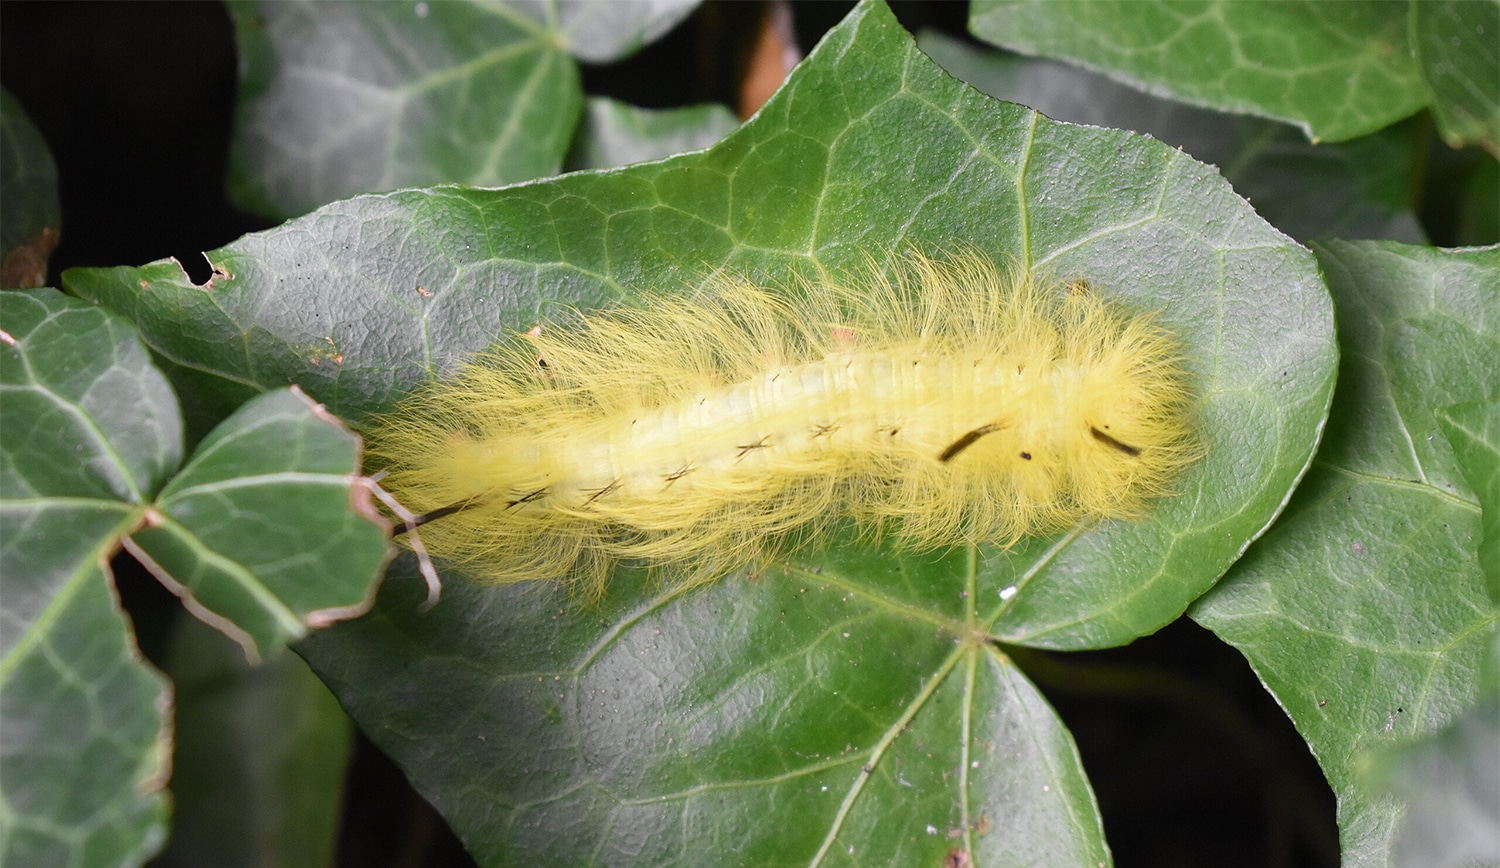 horizontal photo of an American Dagger Moth Caterpillar on some green leaves.